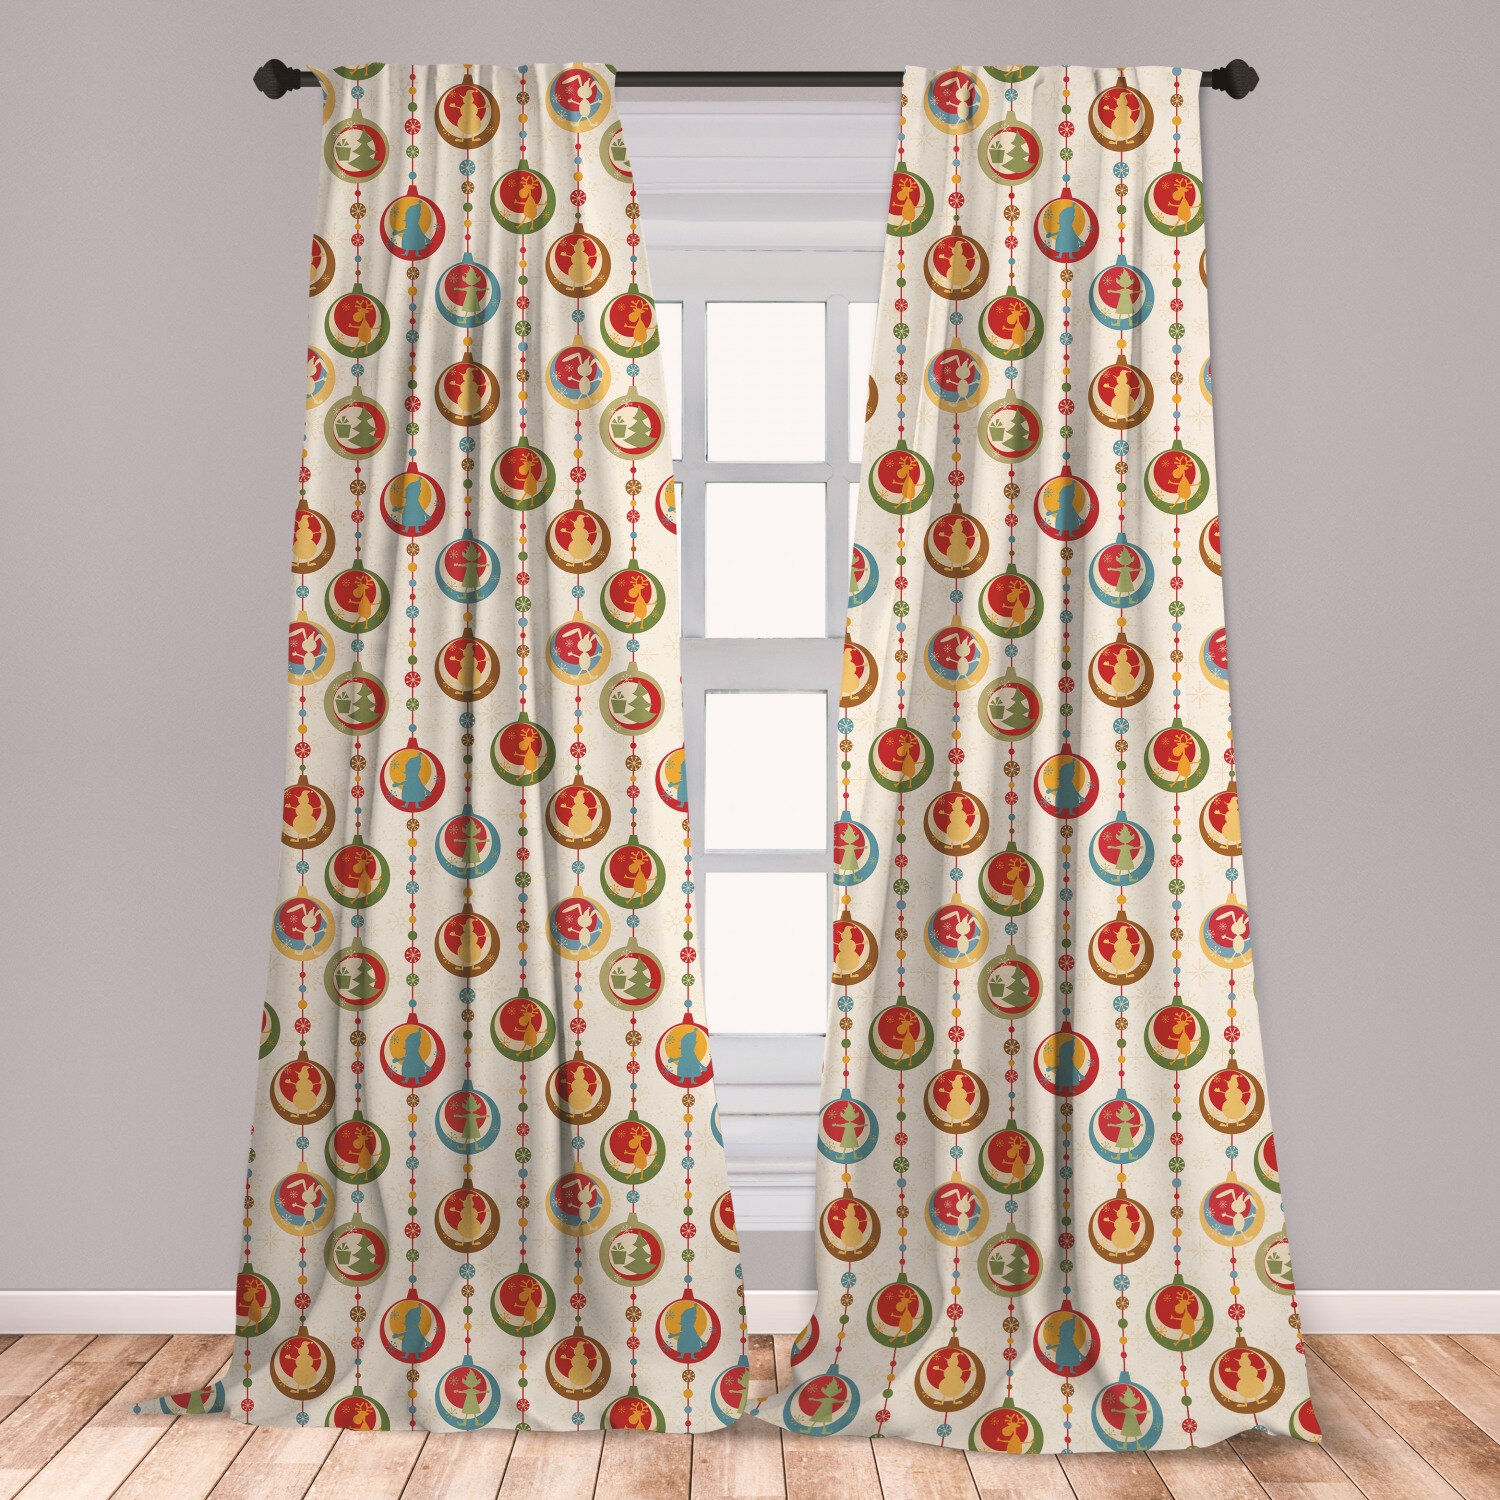 East Urban Home Ambesonne Christmas Curtains